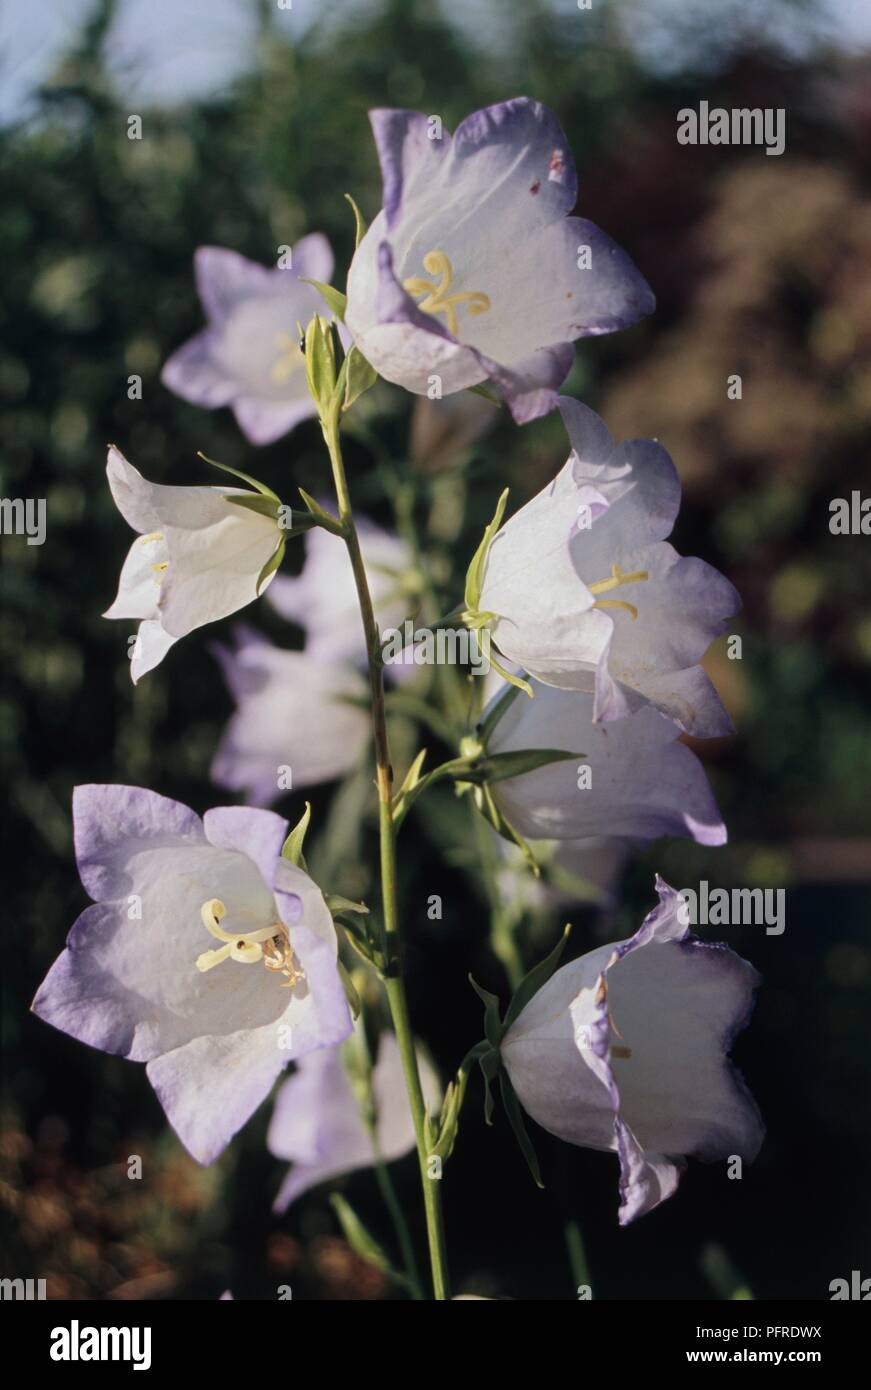 Campanula persicifolia 'Chettle Charm' with white flowers, purple at edges, on long stem, close-up Stock Photo